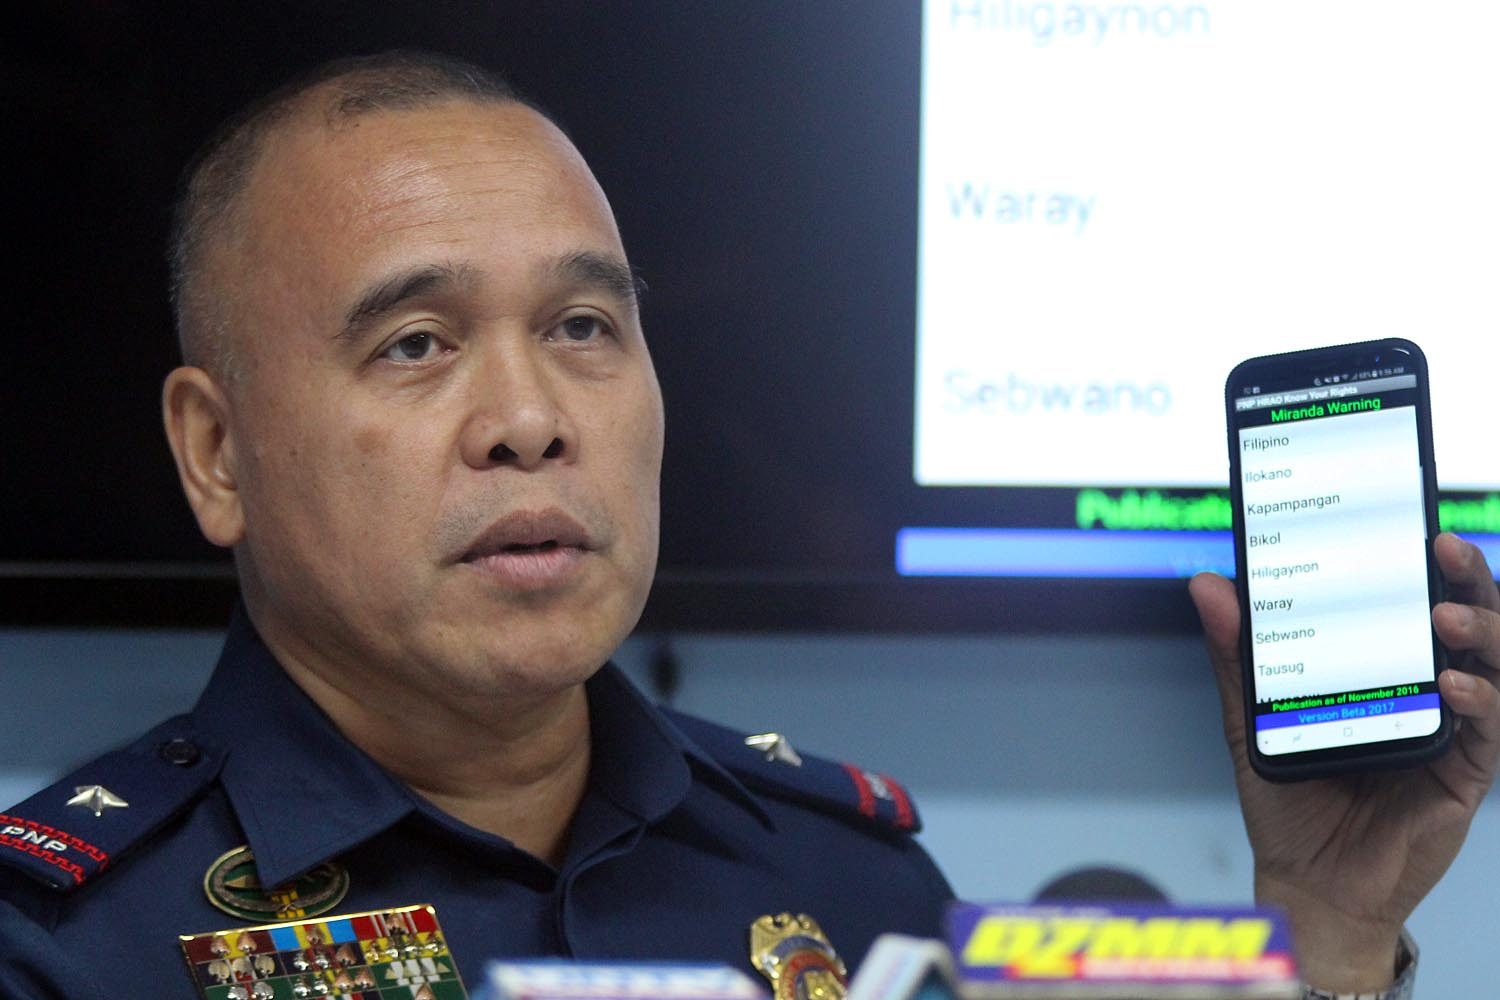 Privacy concerns raised over PNP’s human rights app